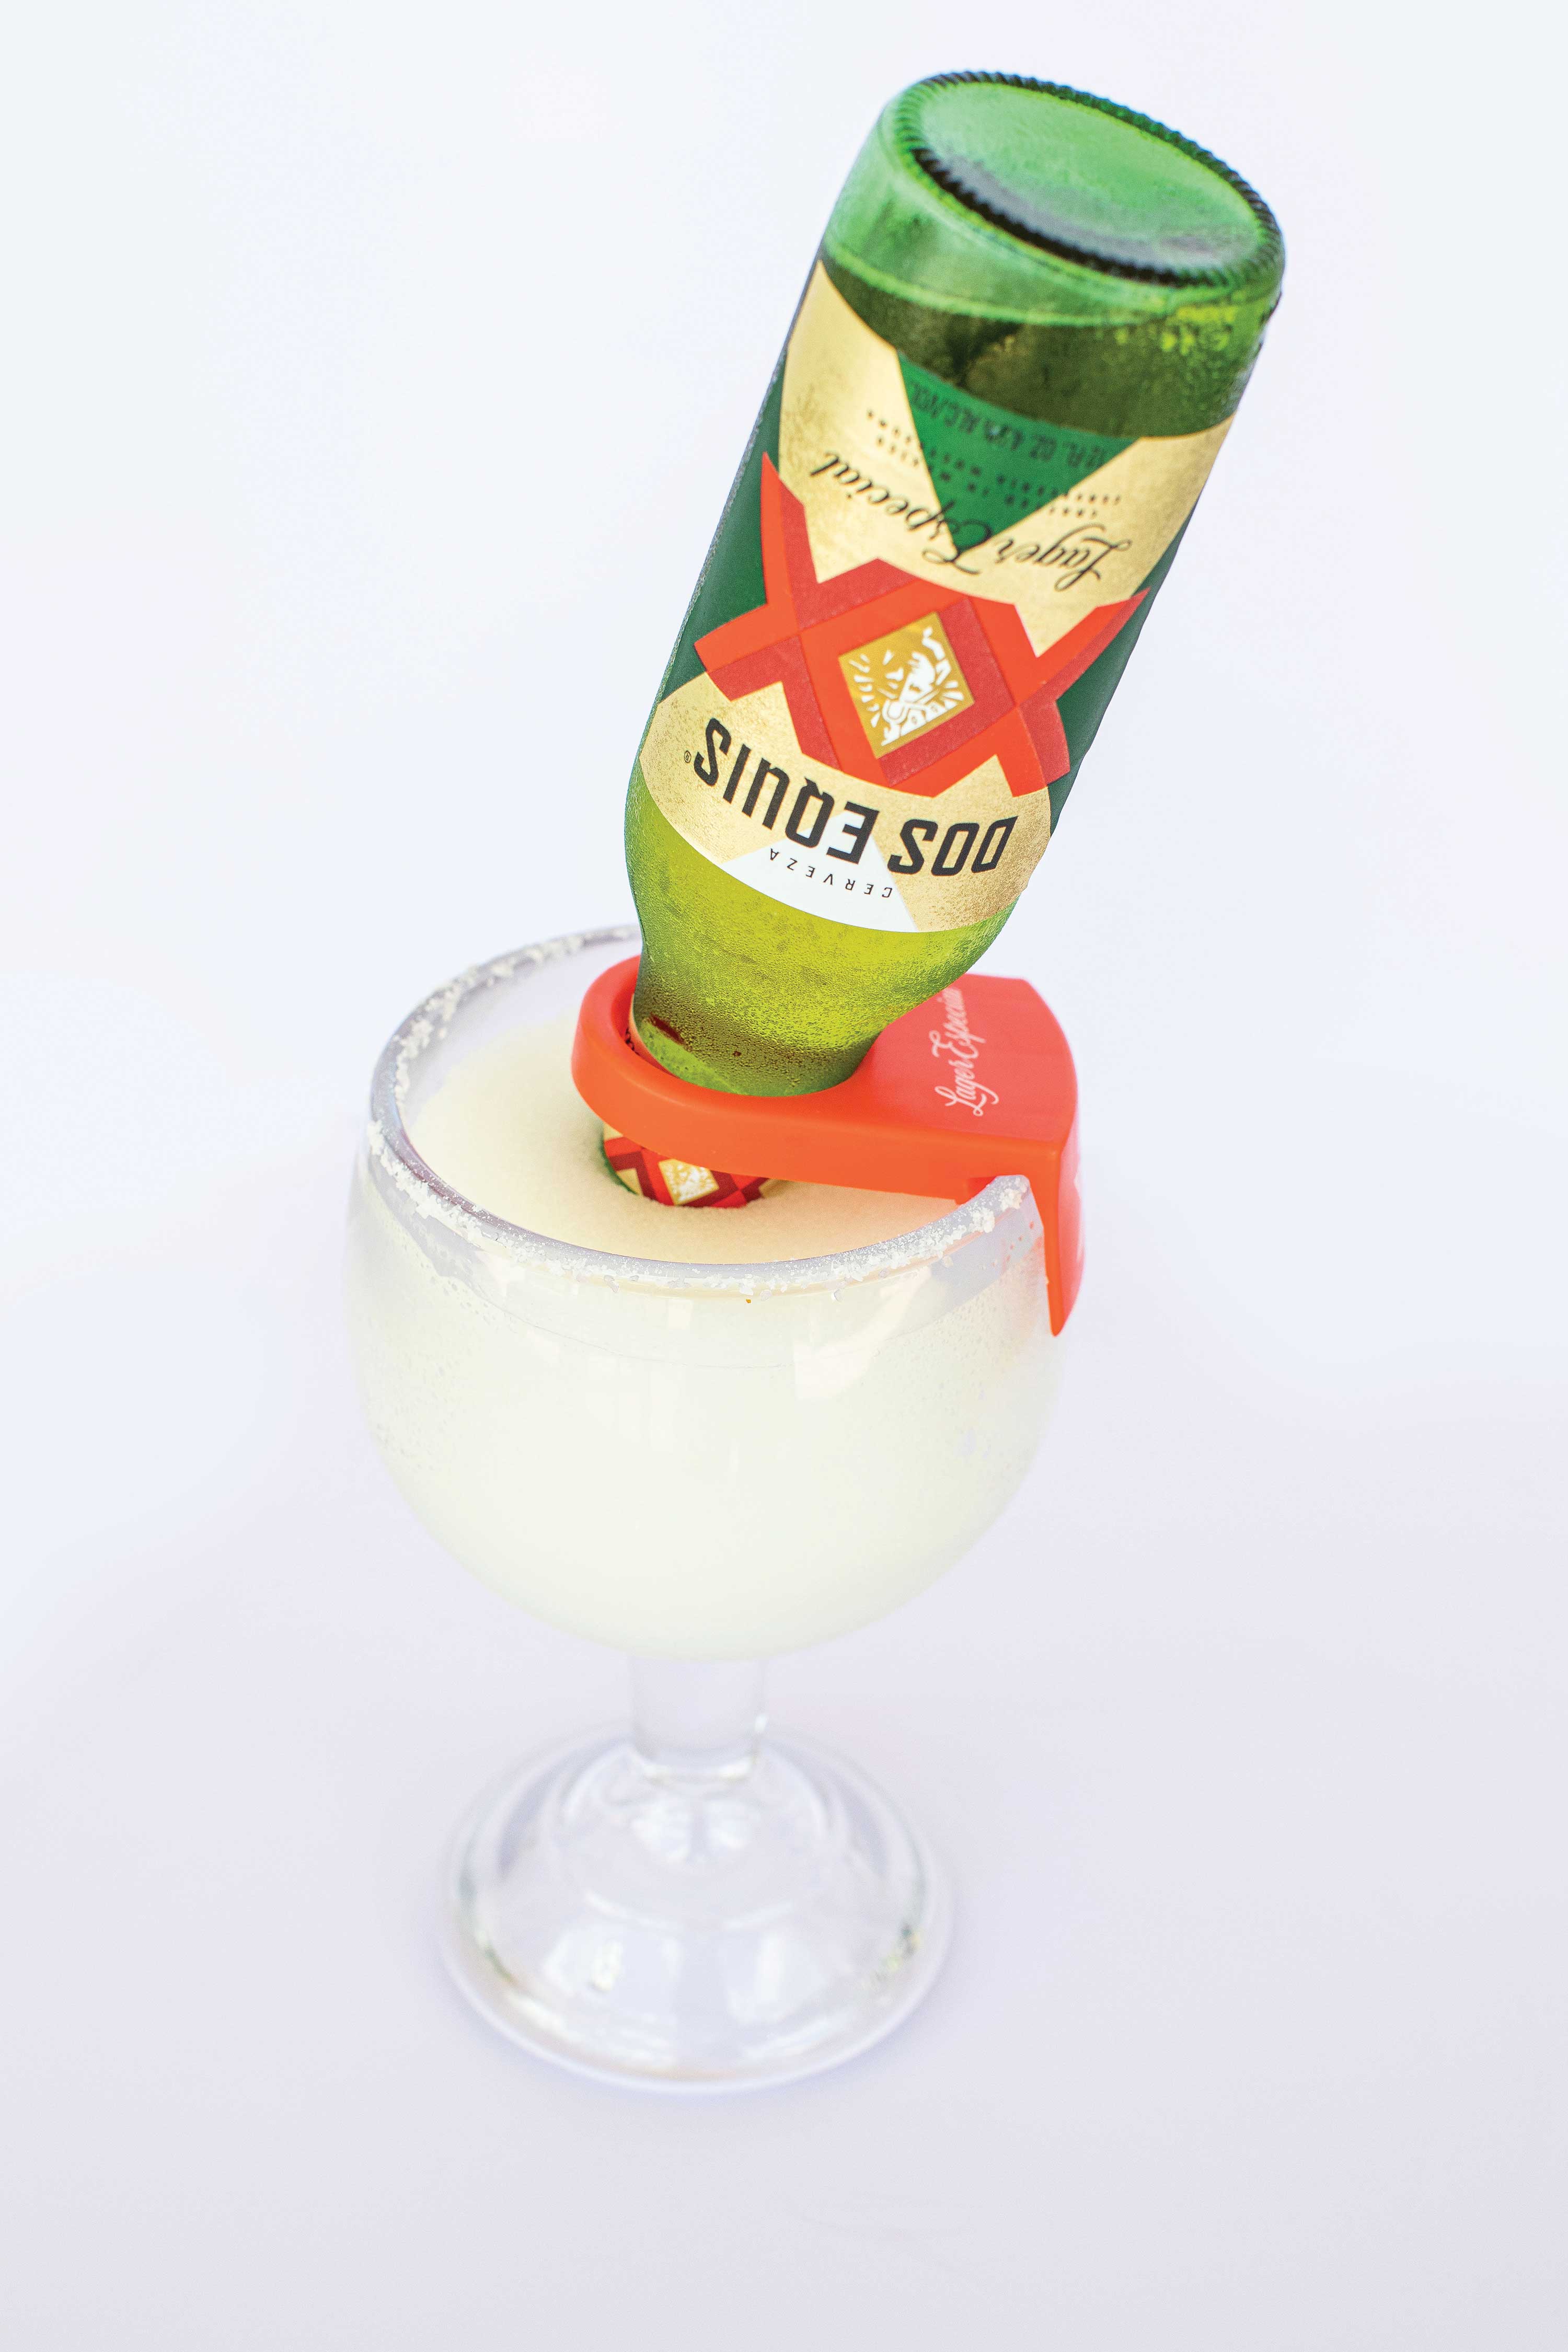 Image: A large glass is filled with icy margarita. A green beer bottle is set upside-down into the glass.